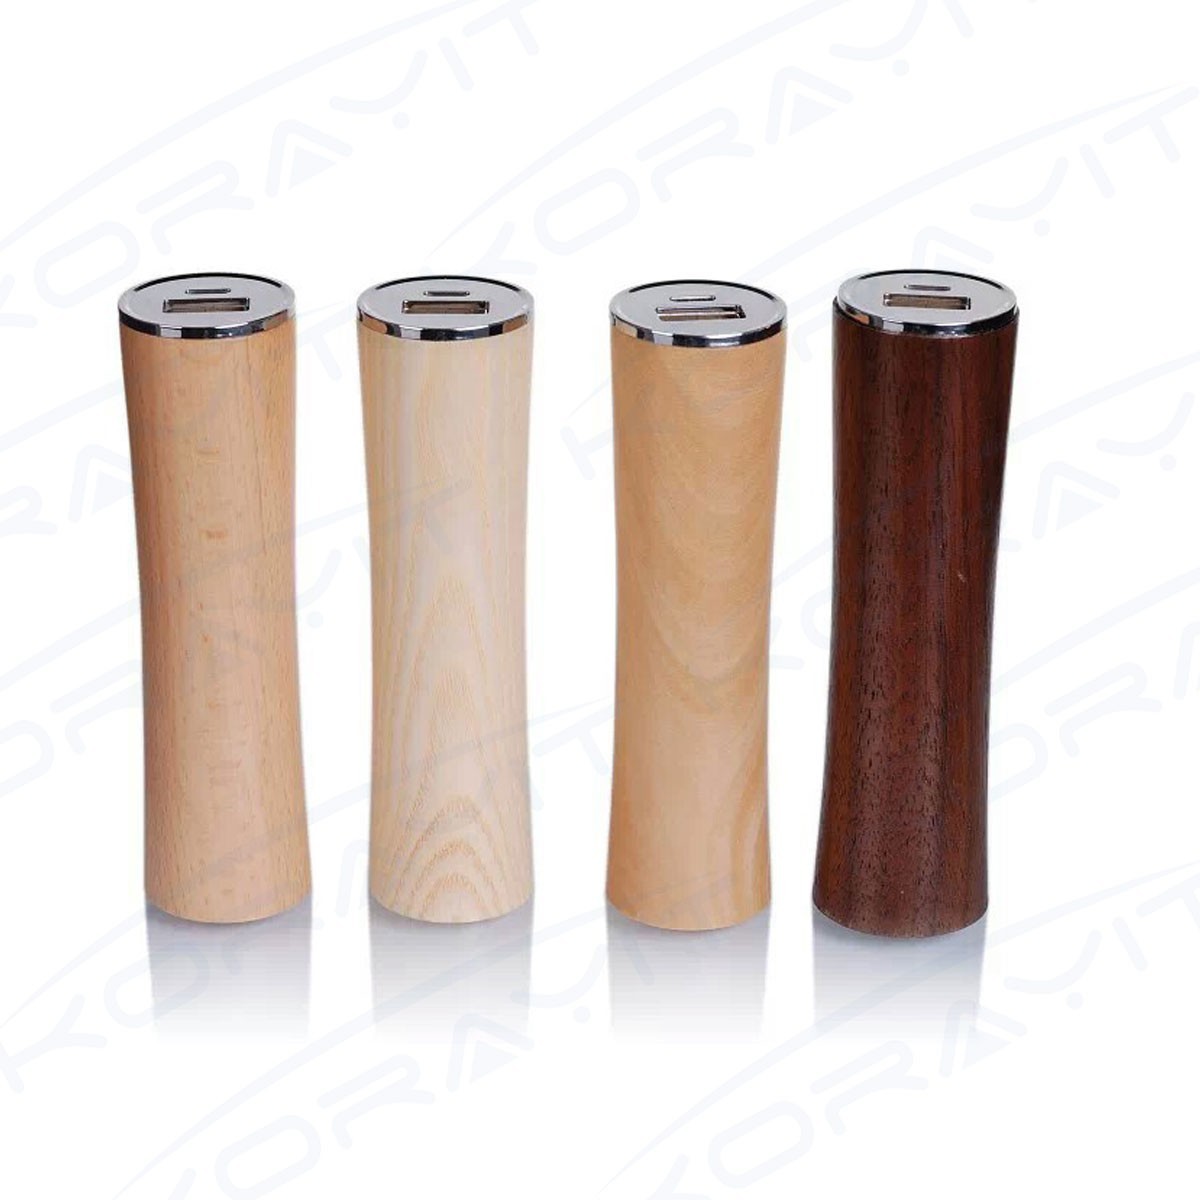 China Cylinder Waistline Wooden Portable Power Bank 2600mAh, External Battery Pack Gifts wholesale